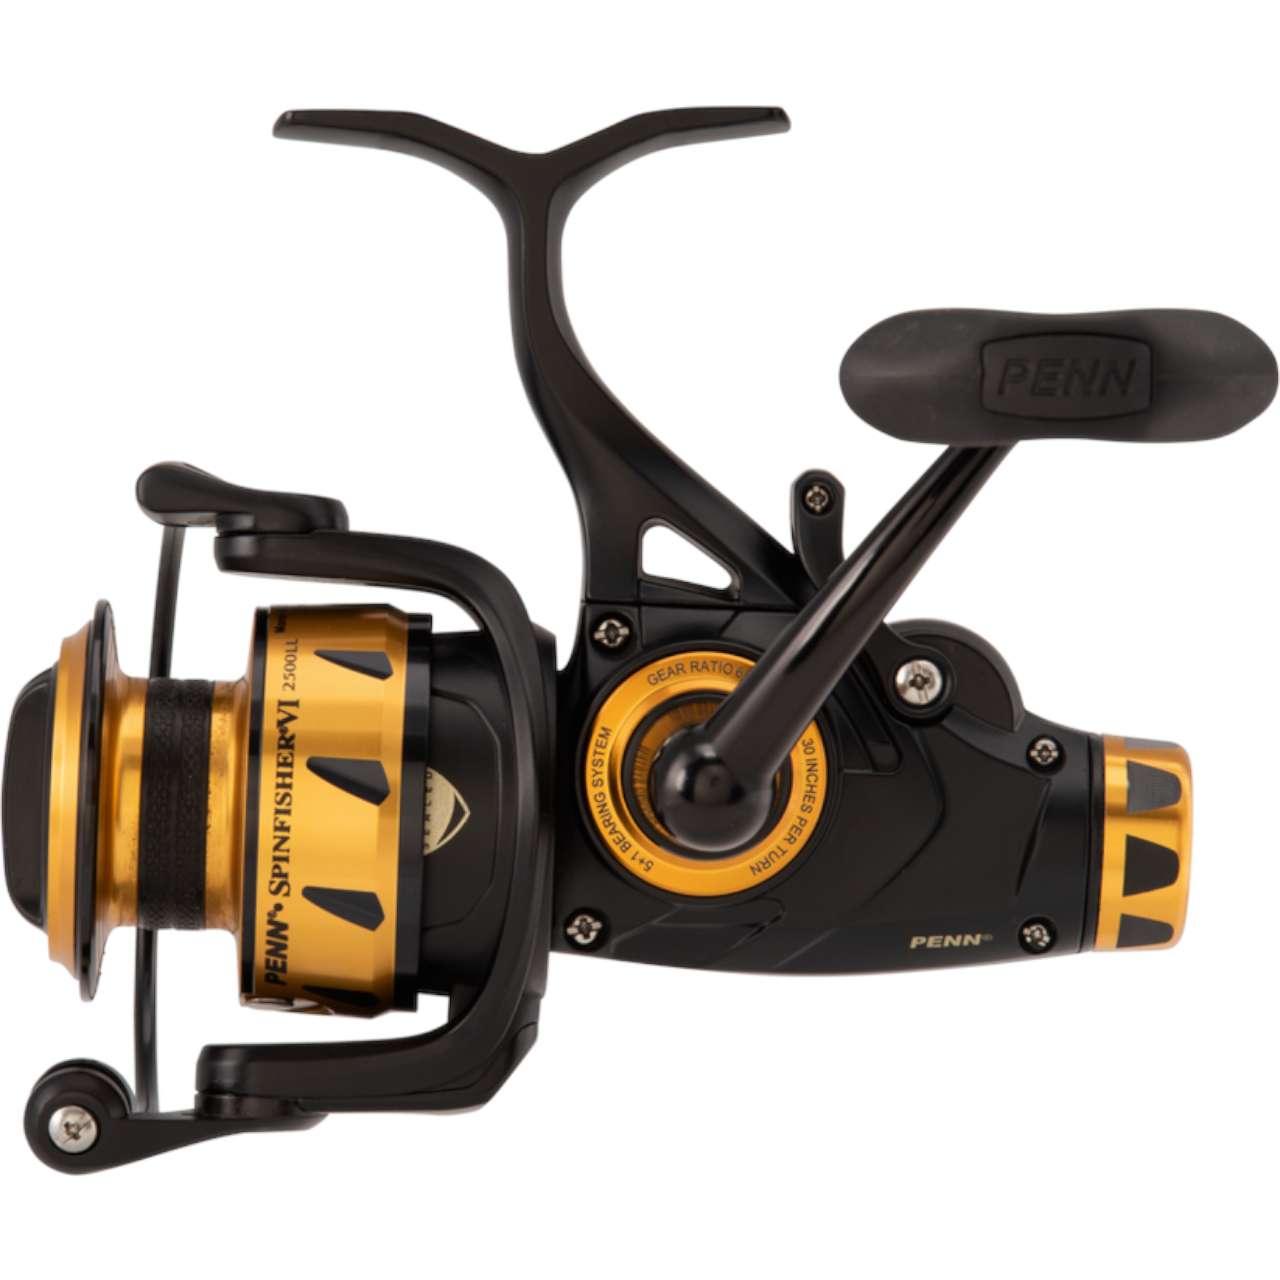 Okuma Ceymar Baitfeeder Spinning Reels Offer A System For Catching More  Fish With Less Hassle and